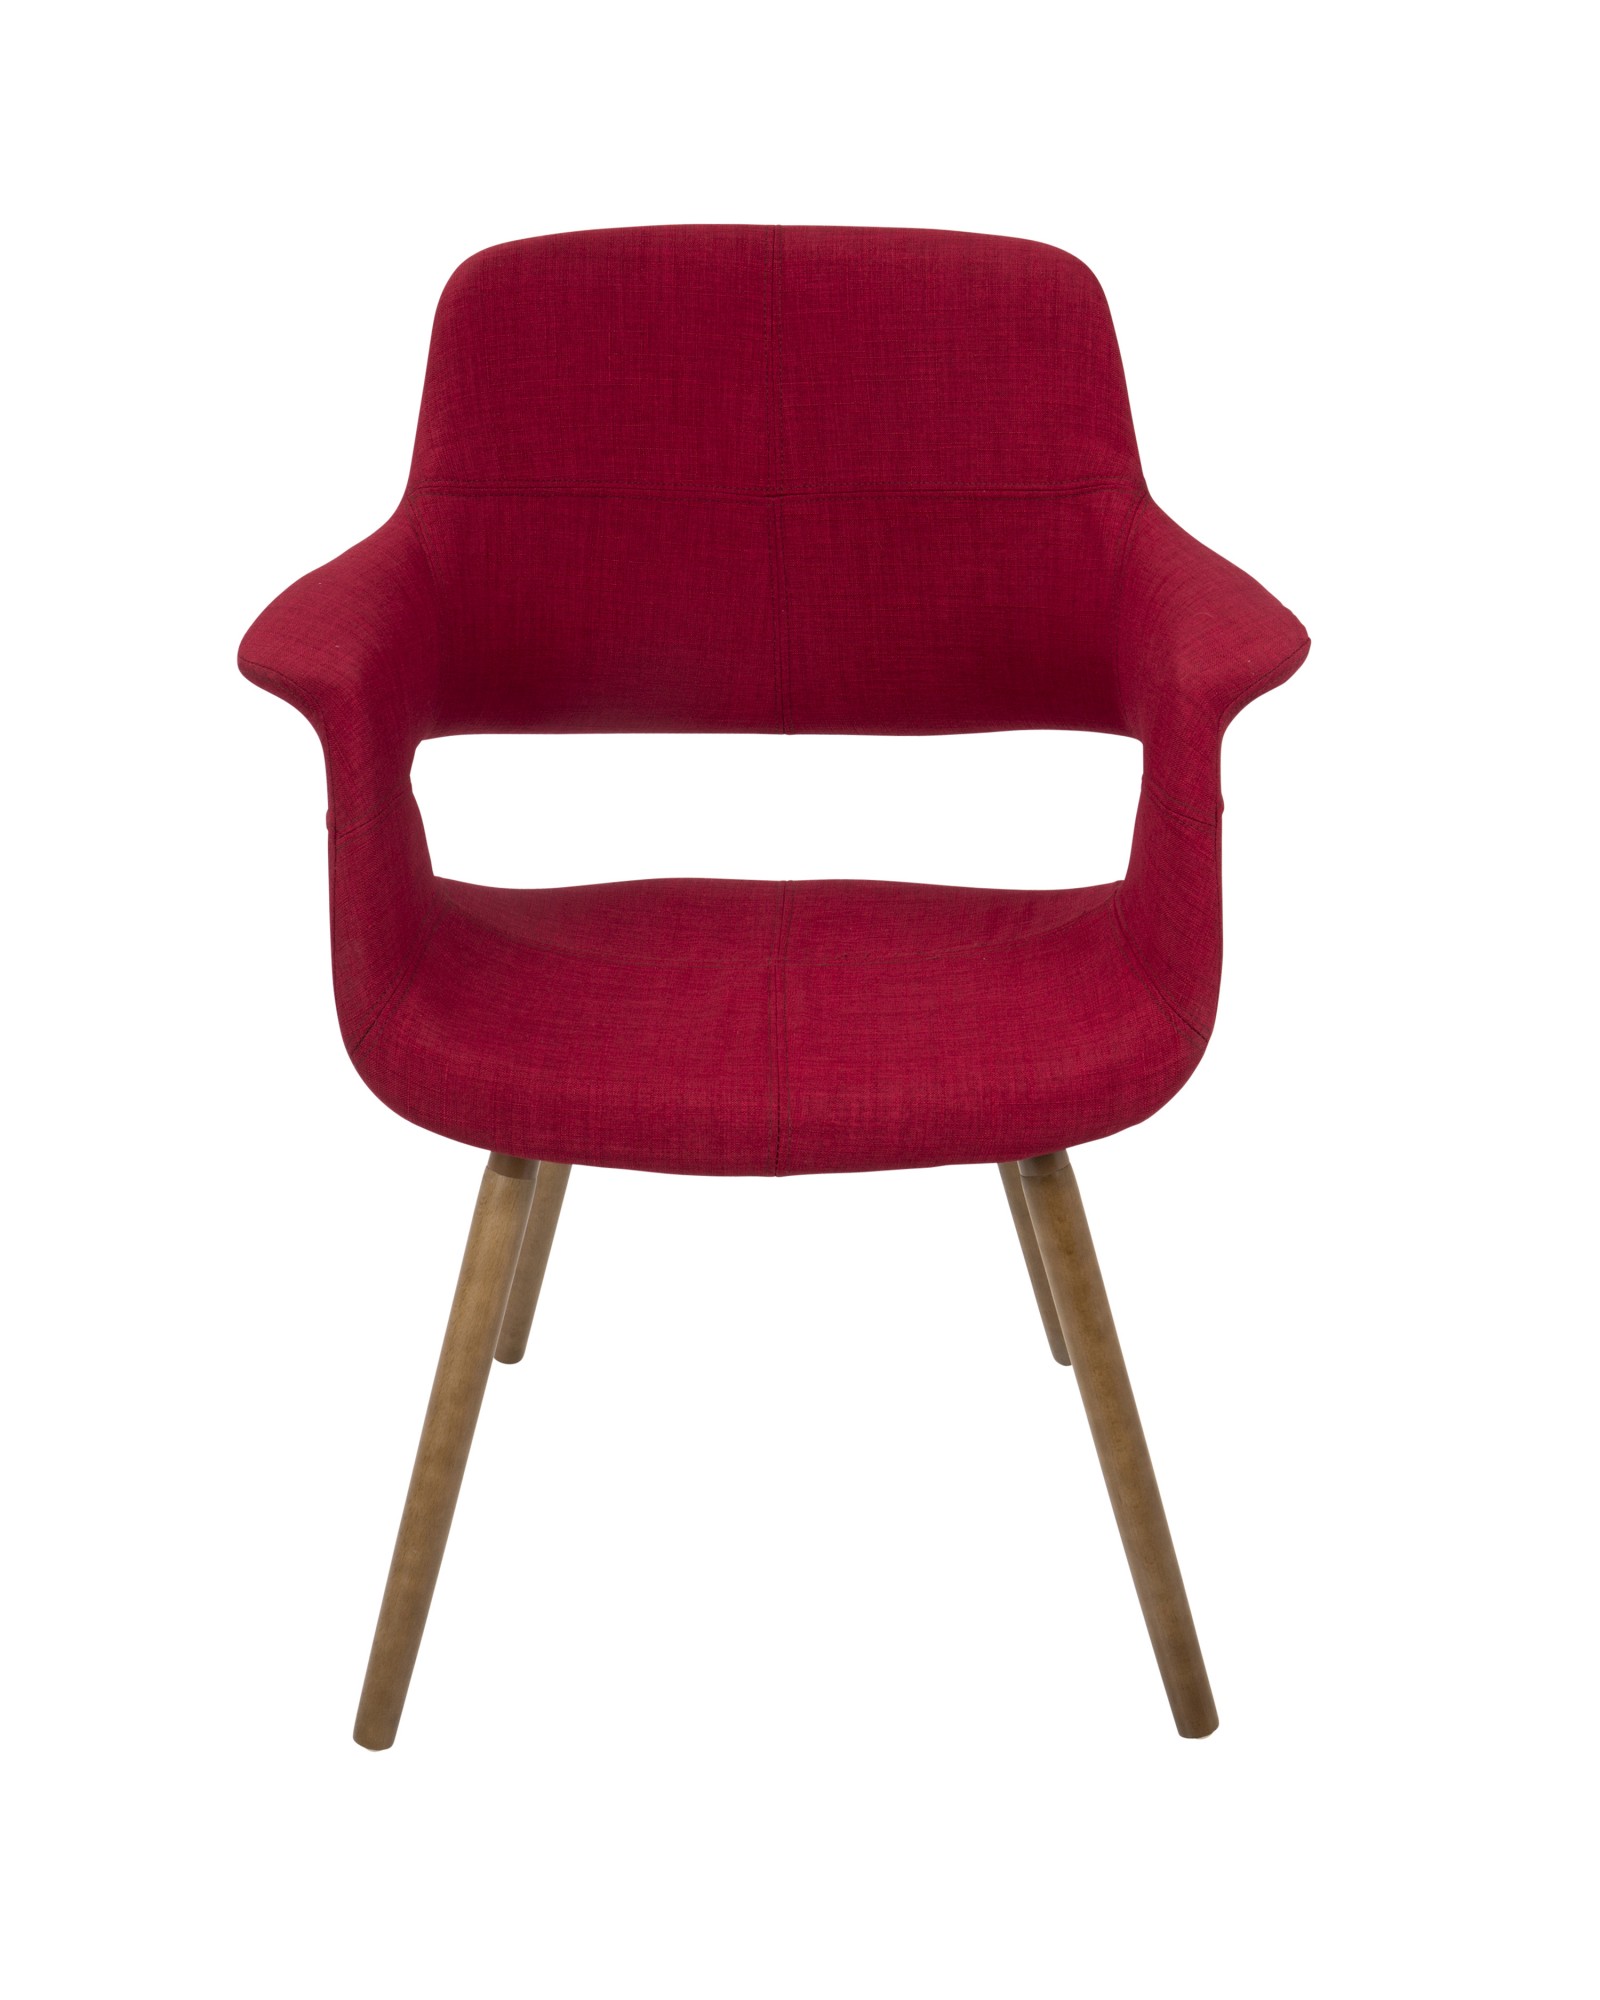 Vintage Flair Mid-Century Modern Chair in Red